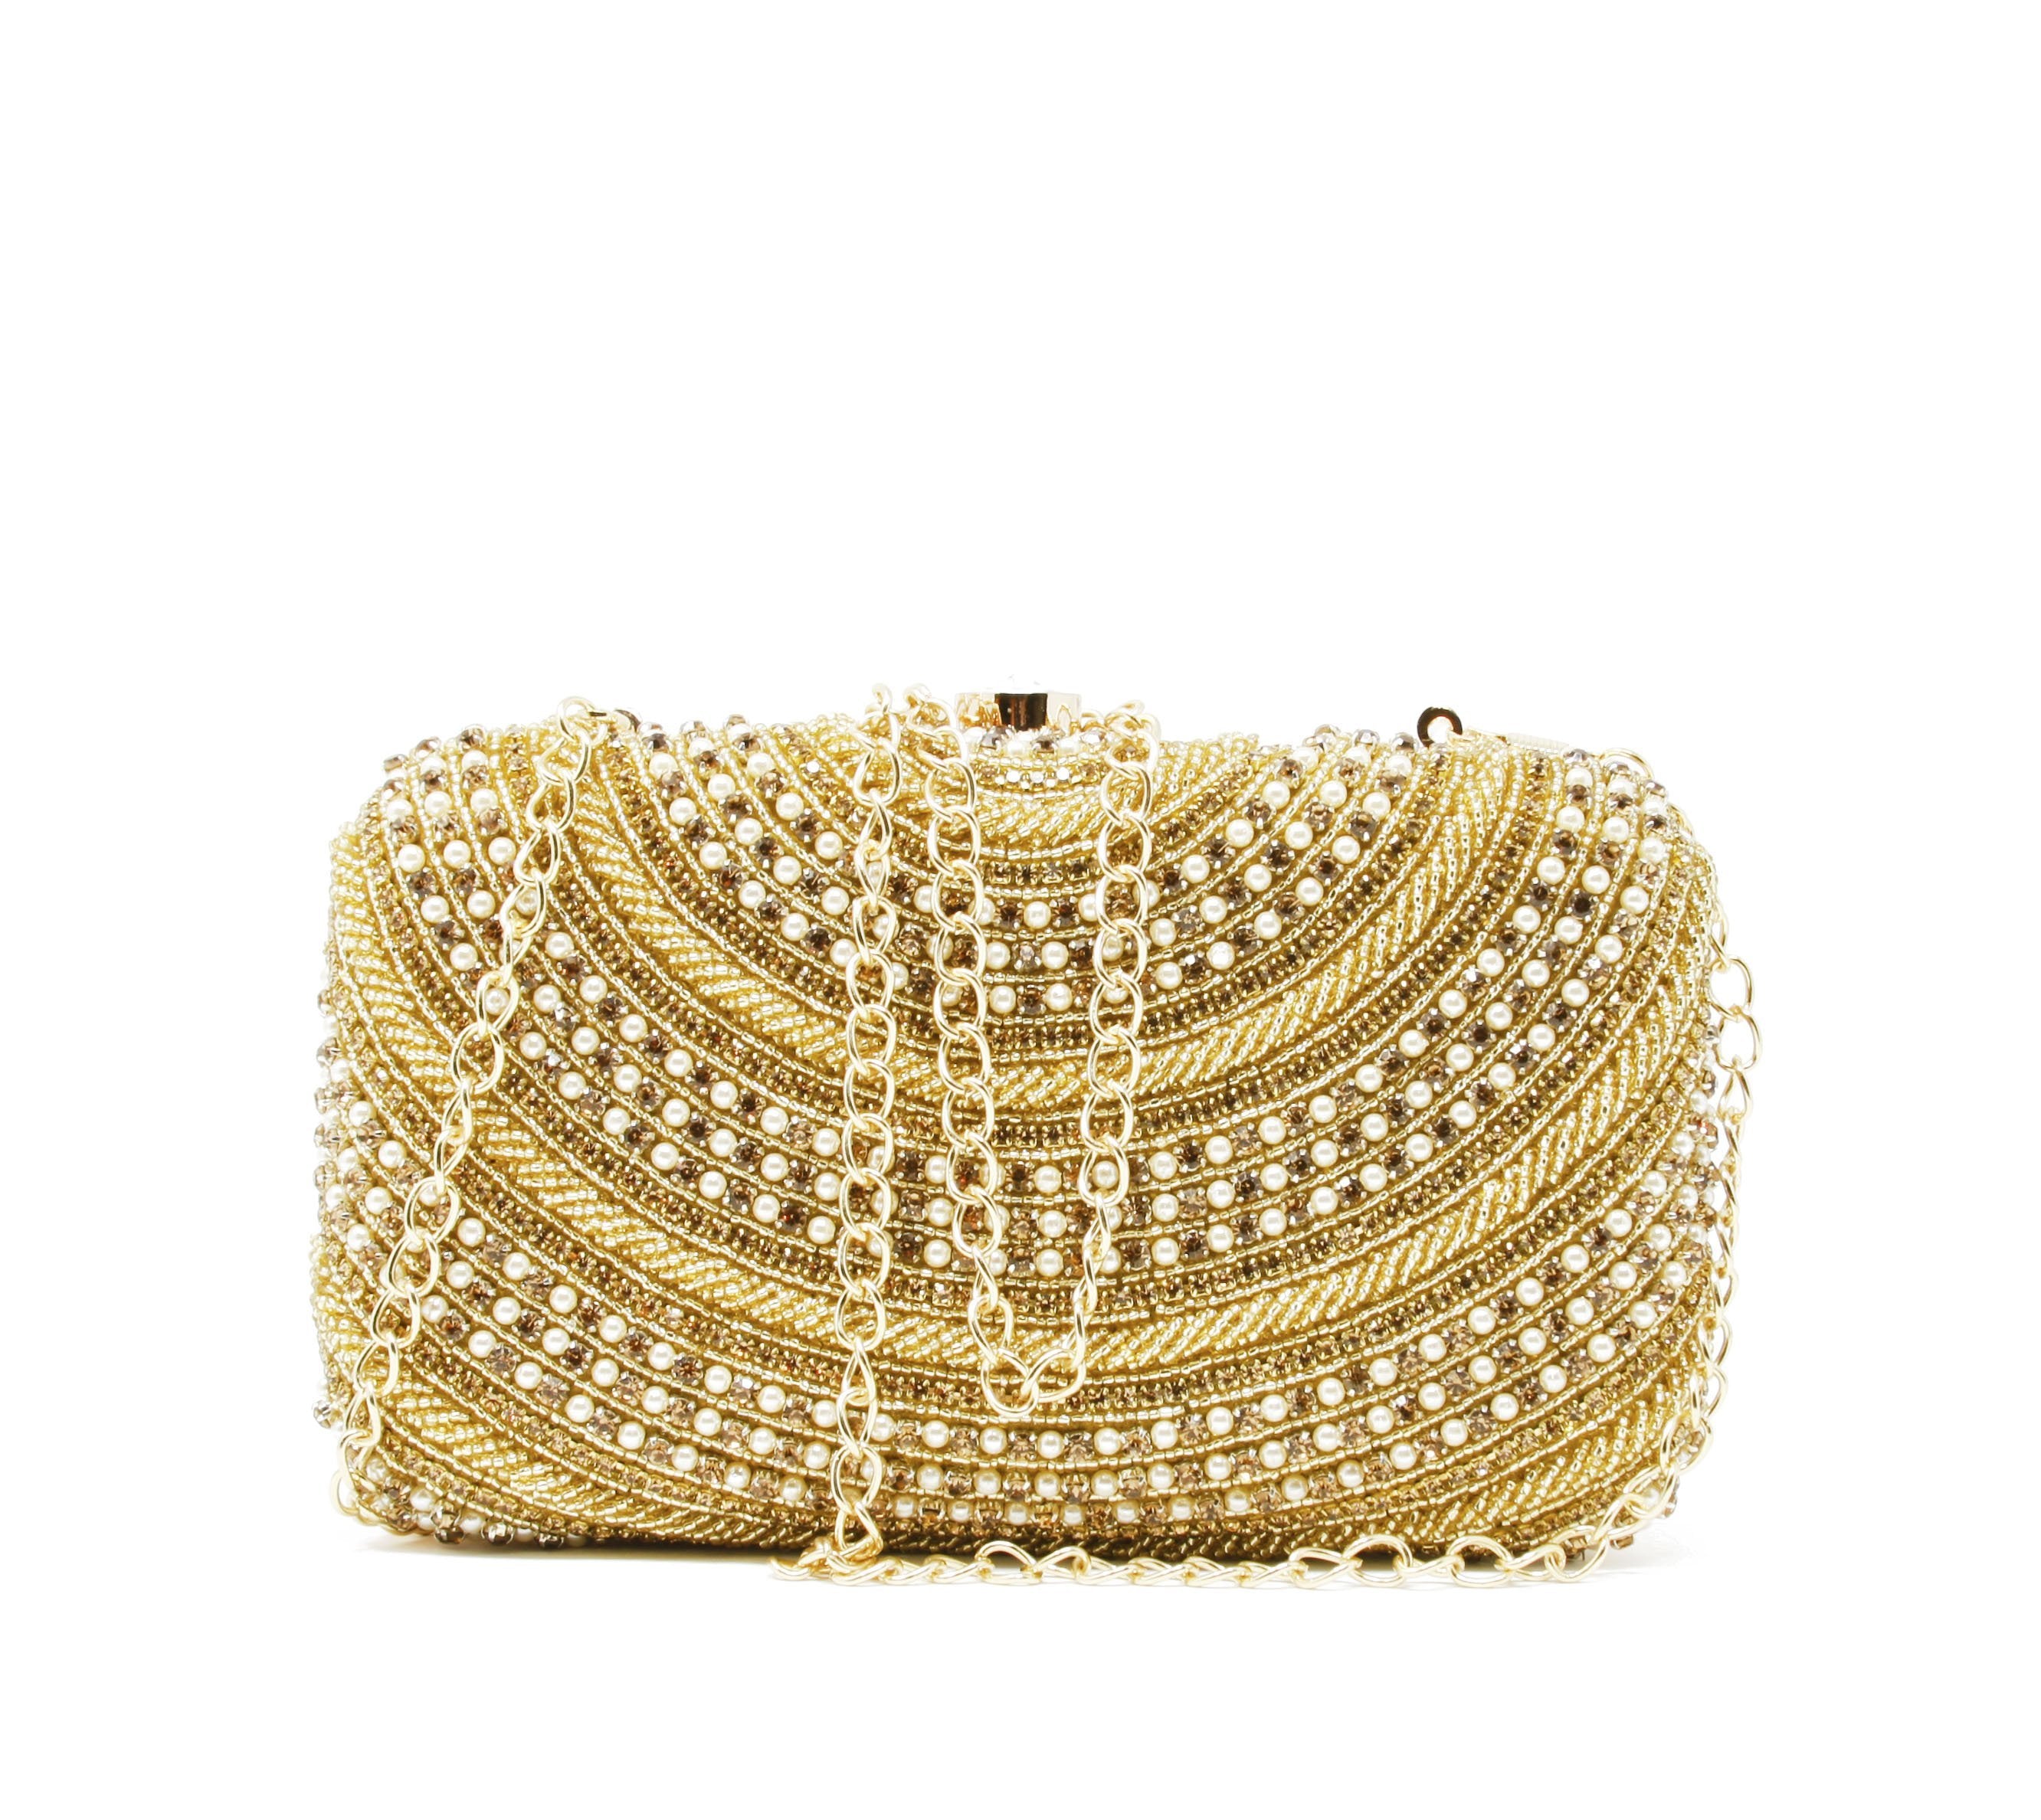 Ivory and gold clutch heavily embroidered with beads and pearls